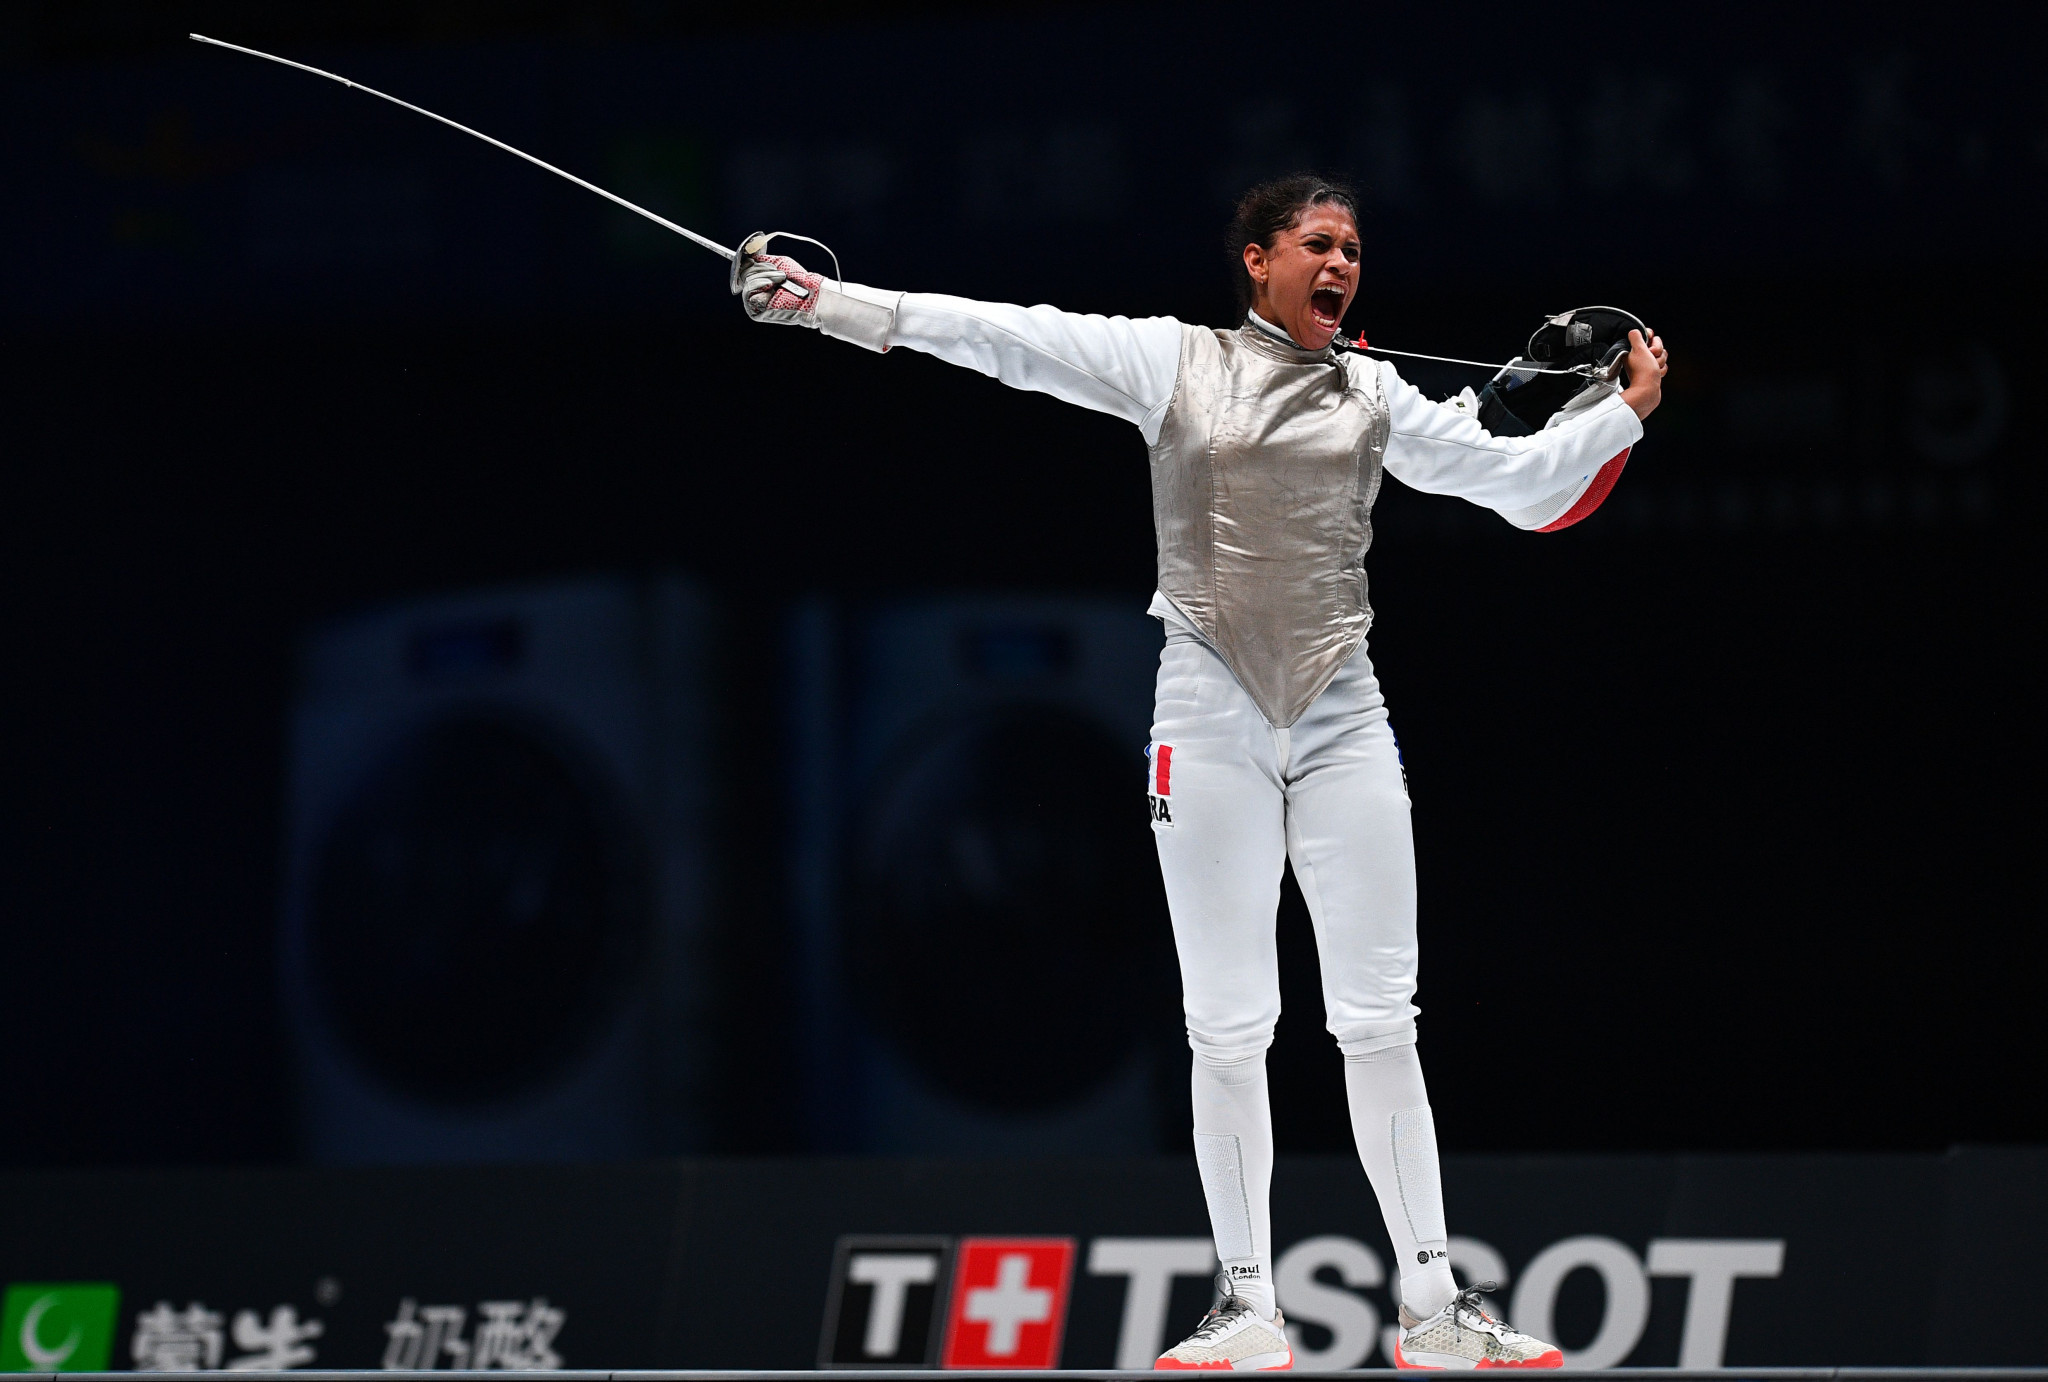 Fourth seeds France snatch women's team foil title at FIE World Cup in Katowice 